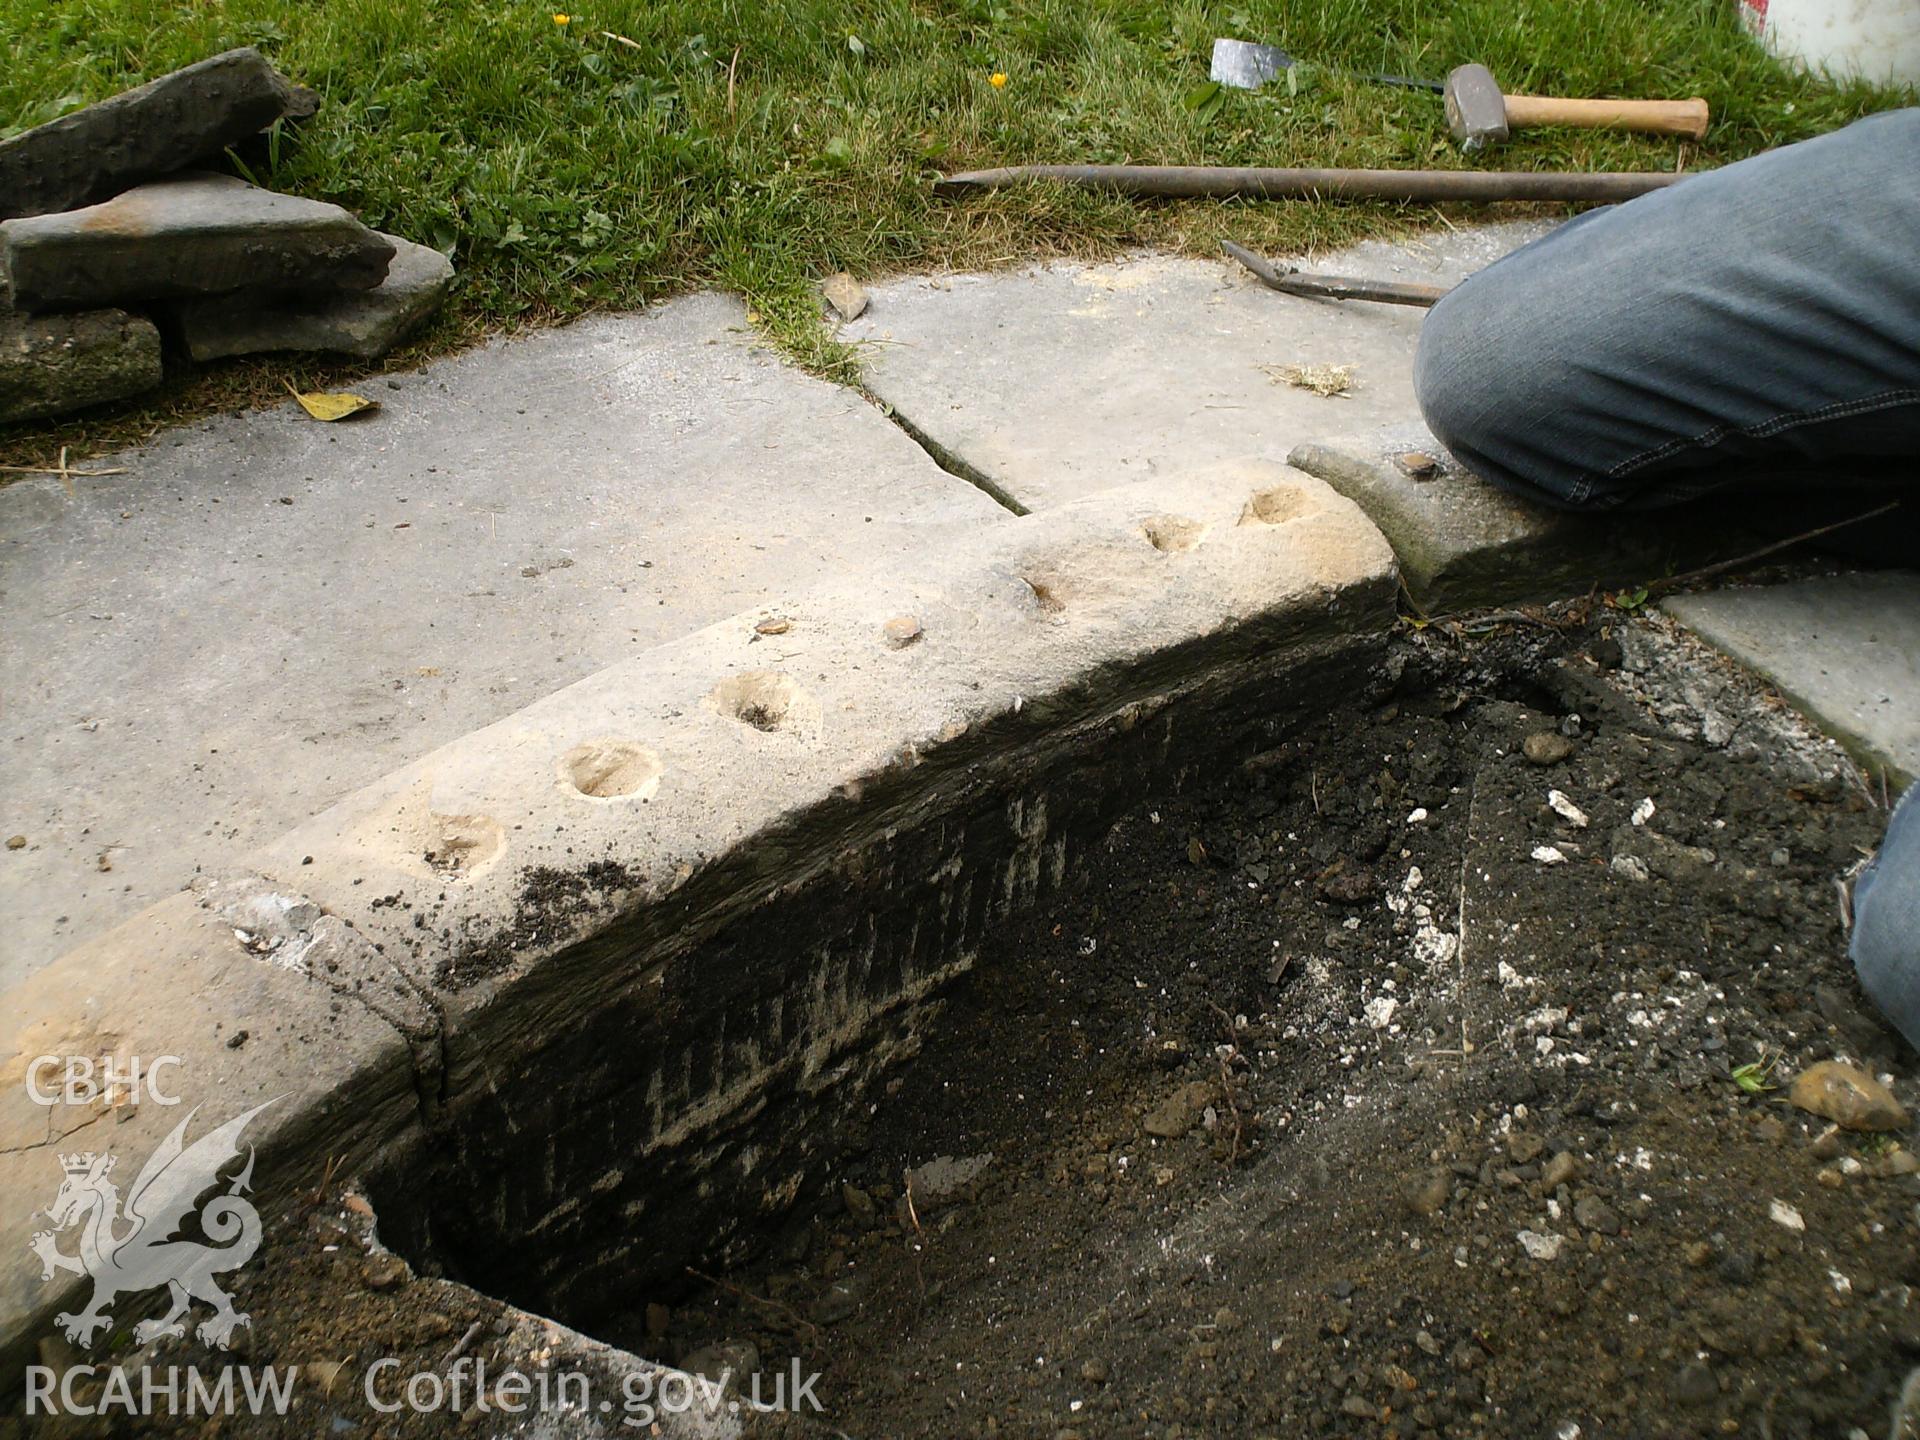 Digital image showing the depth of the kerb stones before restoration.